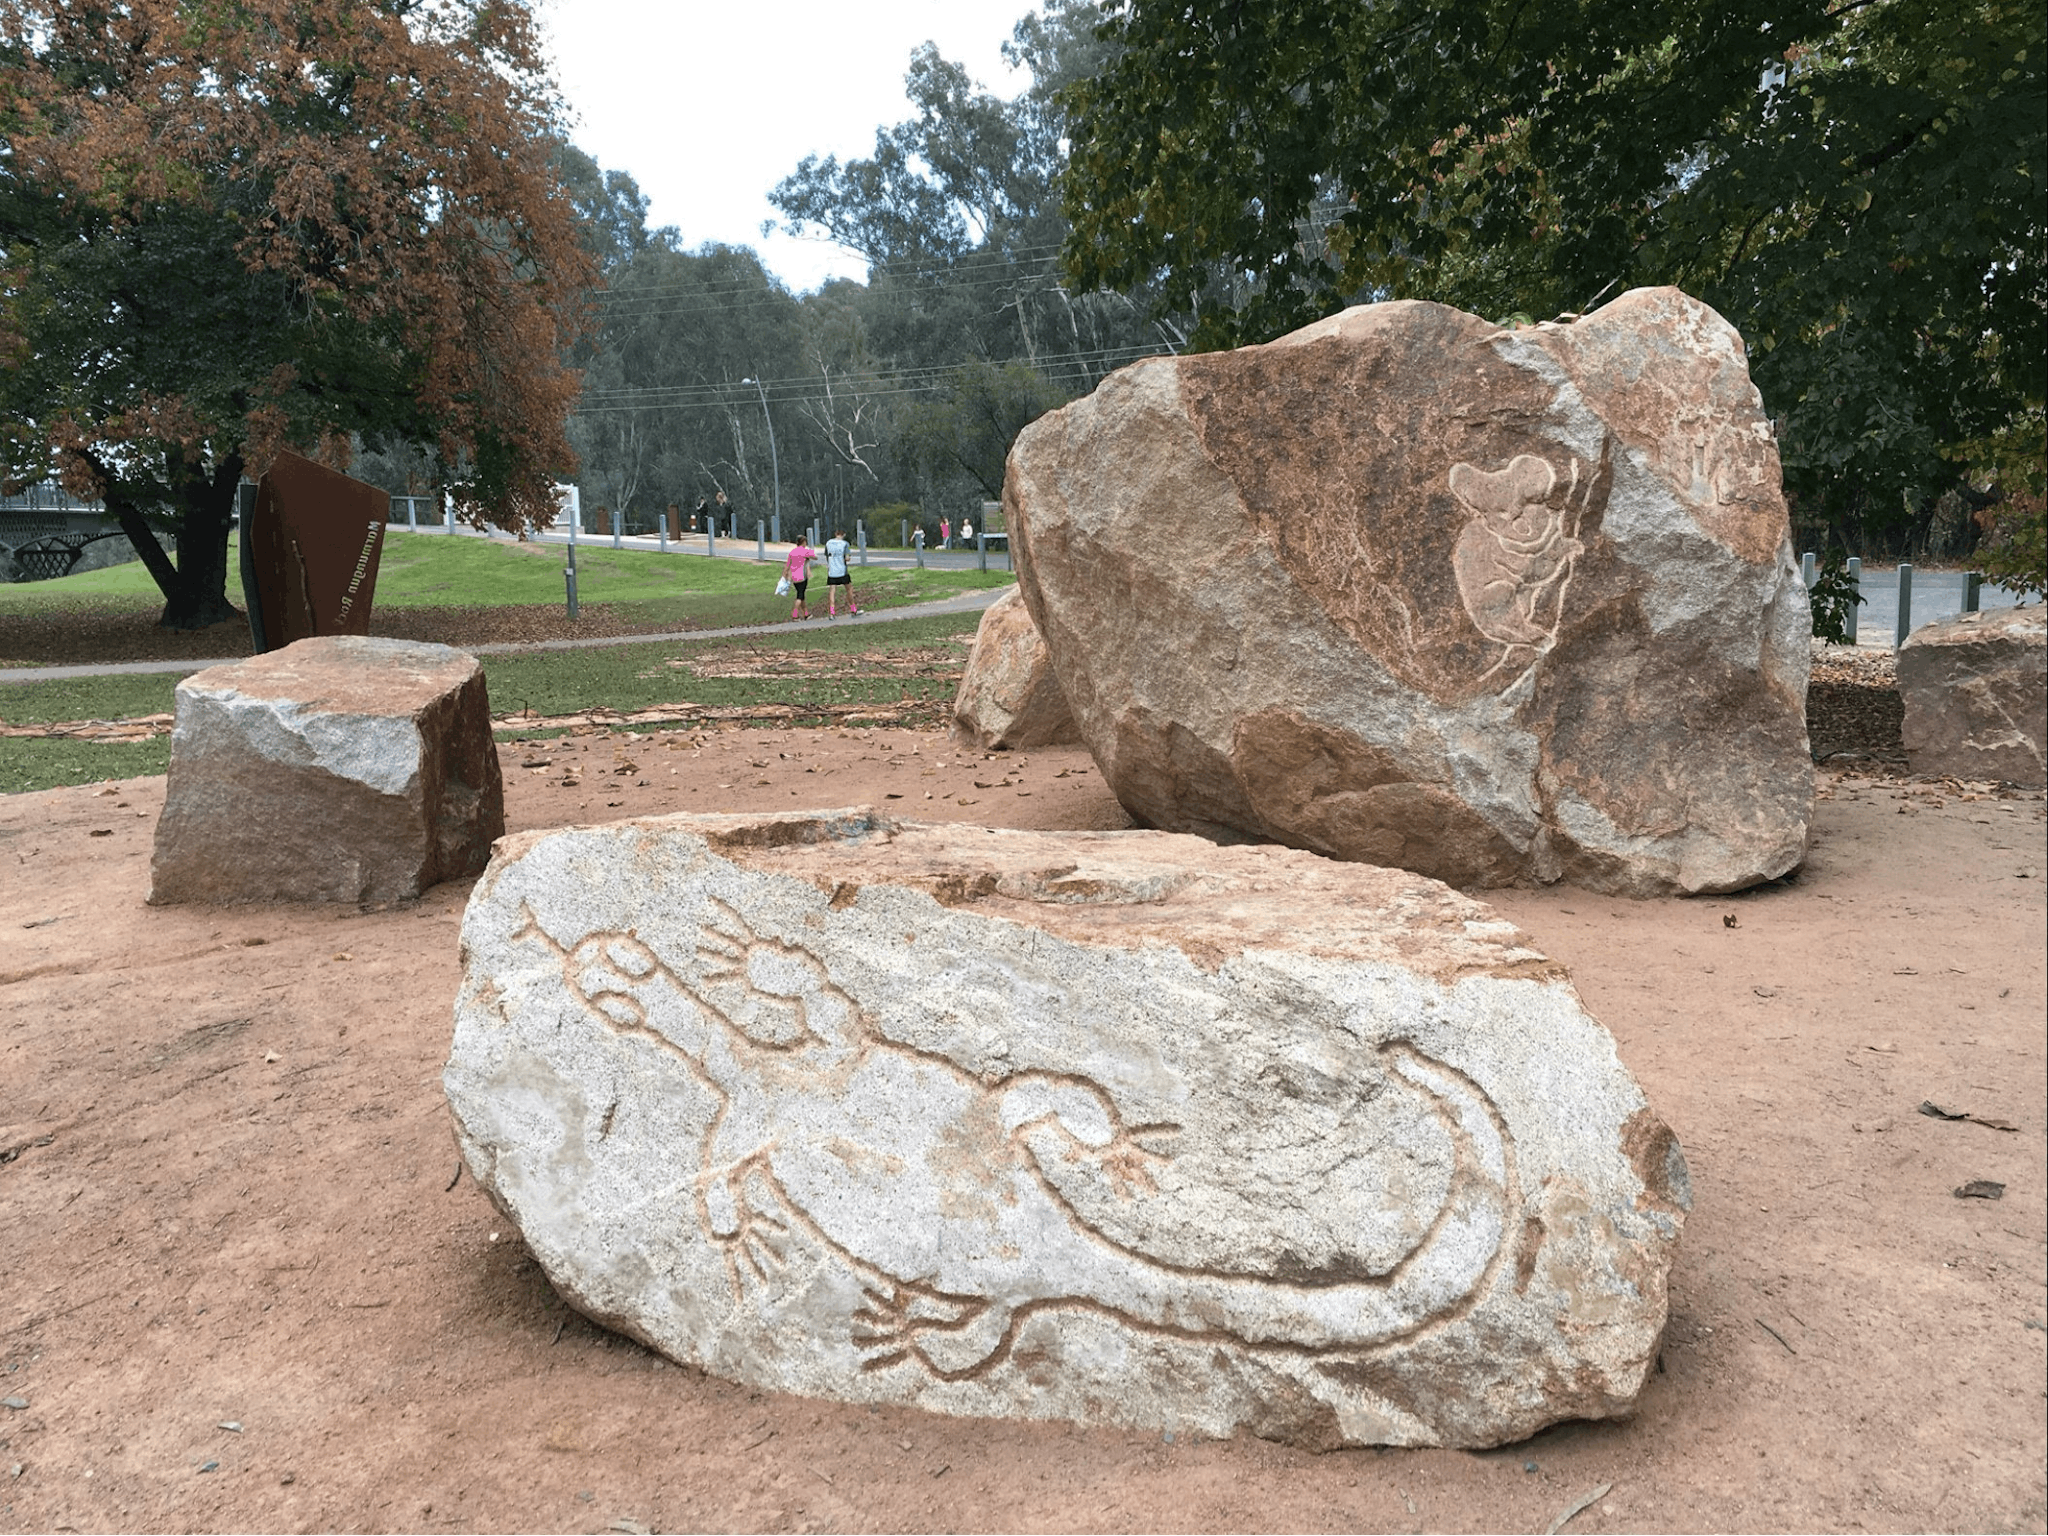 Three large rocks, white rock with carving of lizard, large brown rock with carving of koala,  park